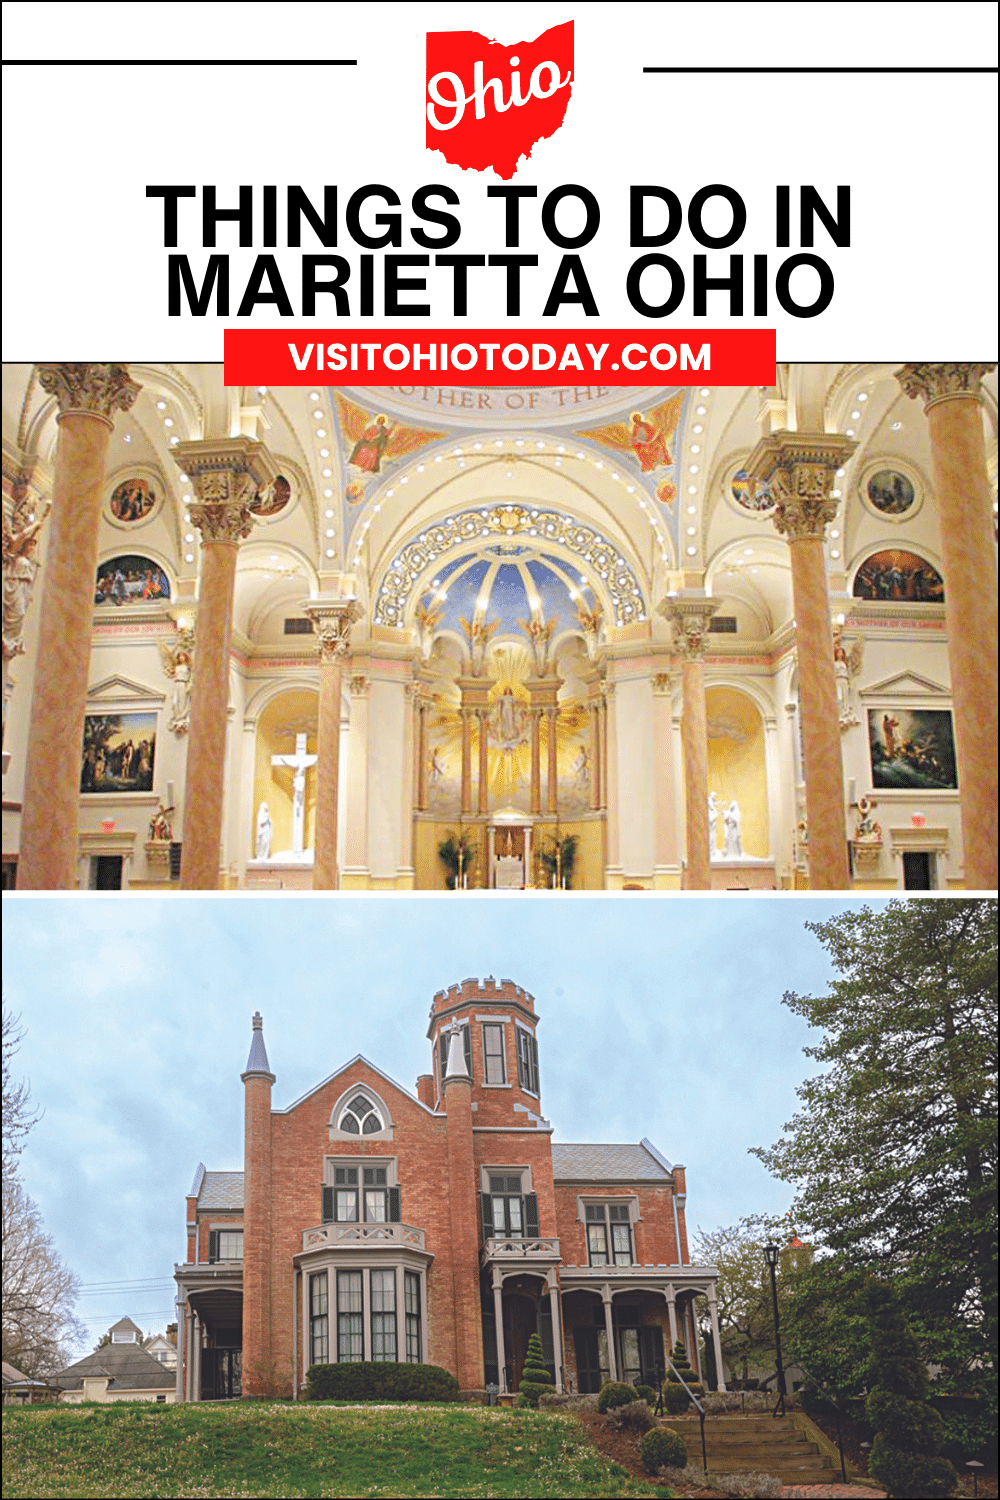 Whether you would like to visit a museum, go for a drink or grab a bite to eat, the small city of Marietta has something for everyone. We can provide tips on things to do in Marietta Ohio! | Things To Do In Marietta Ohio | Washington County | Marietta Ohio